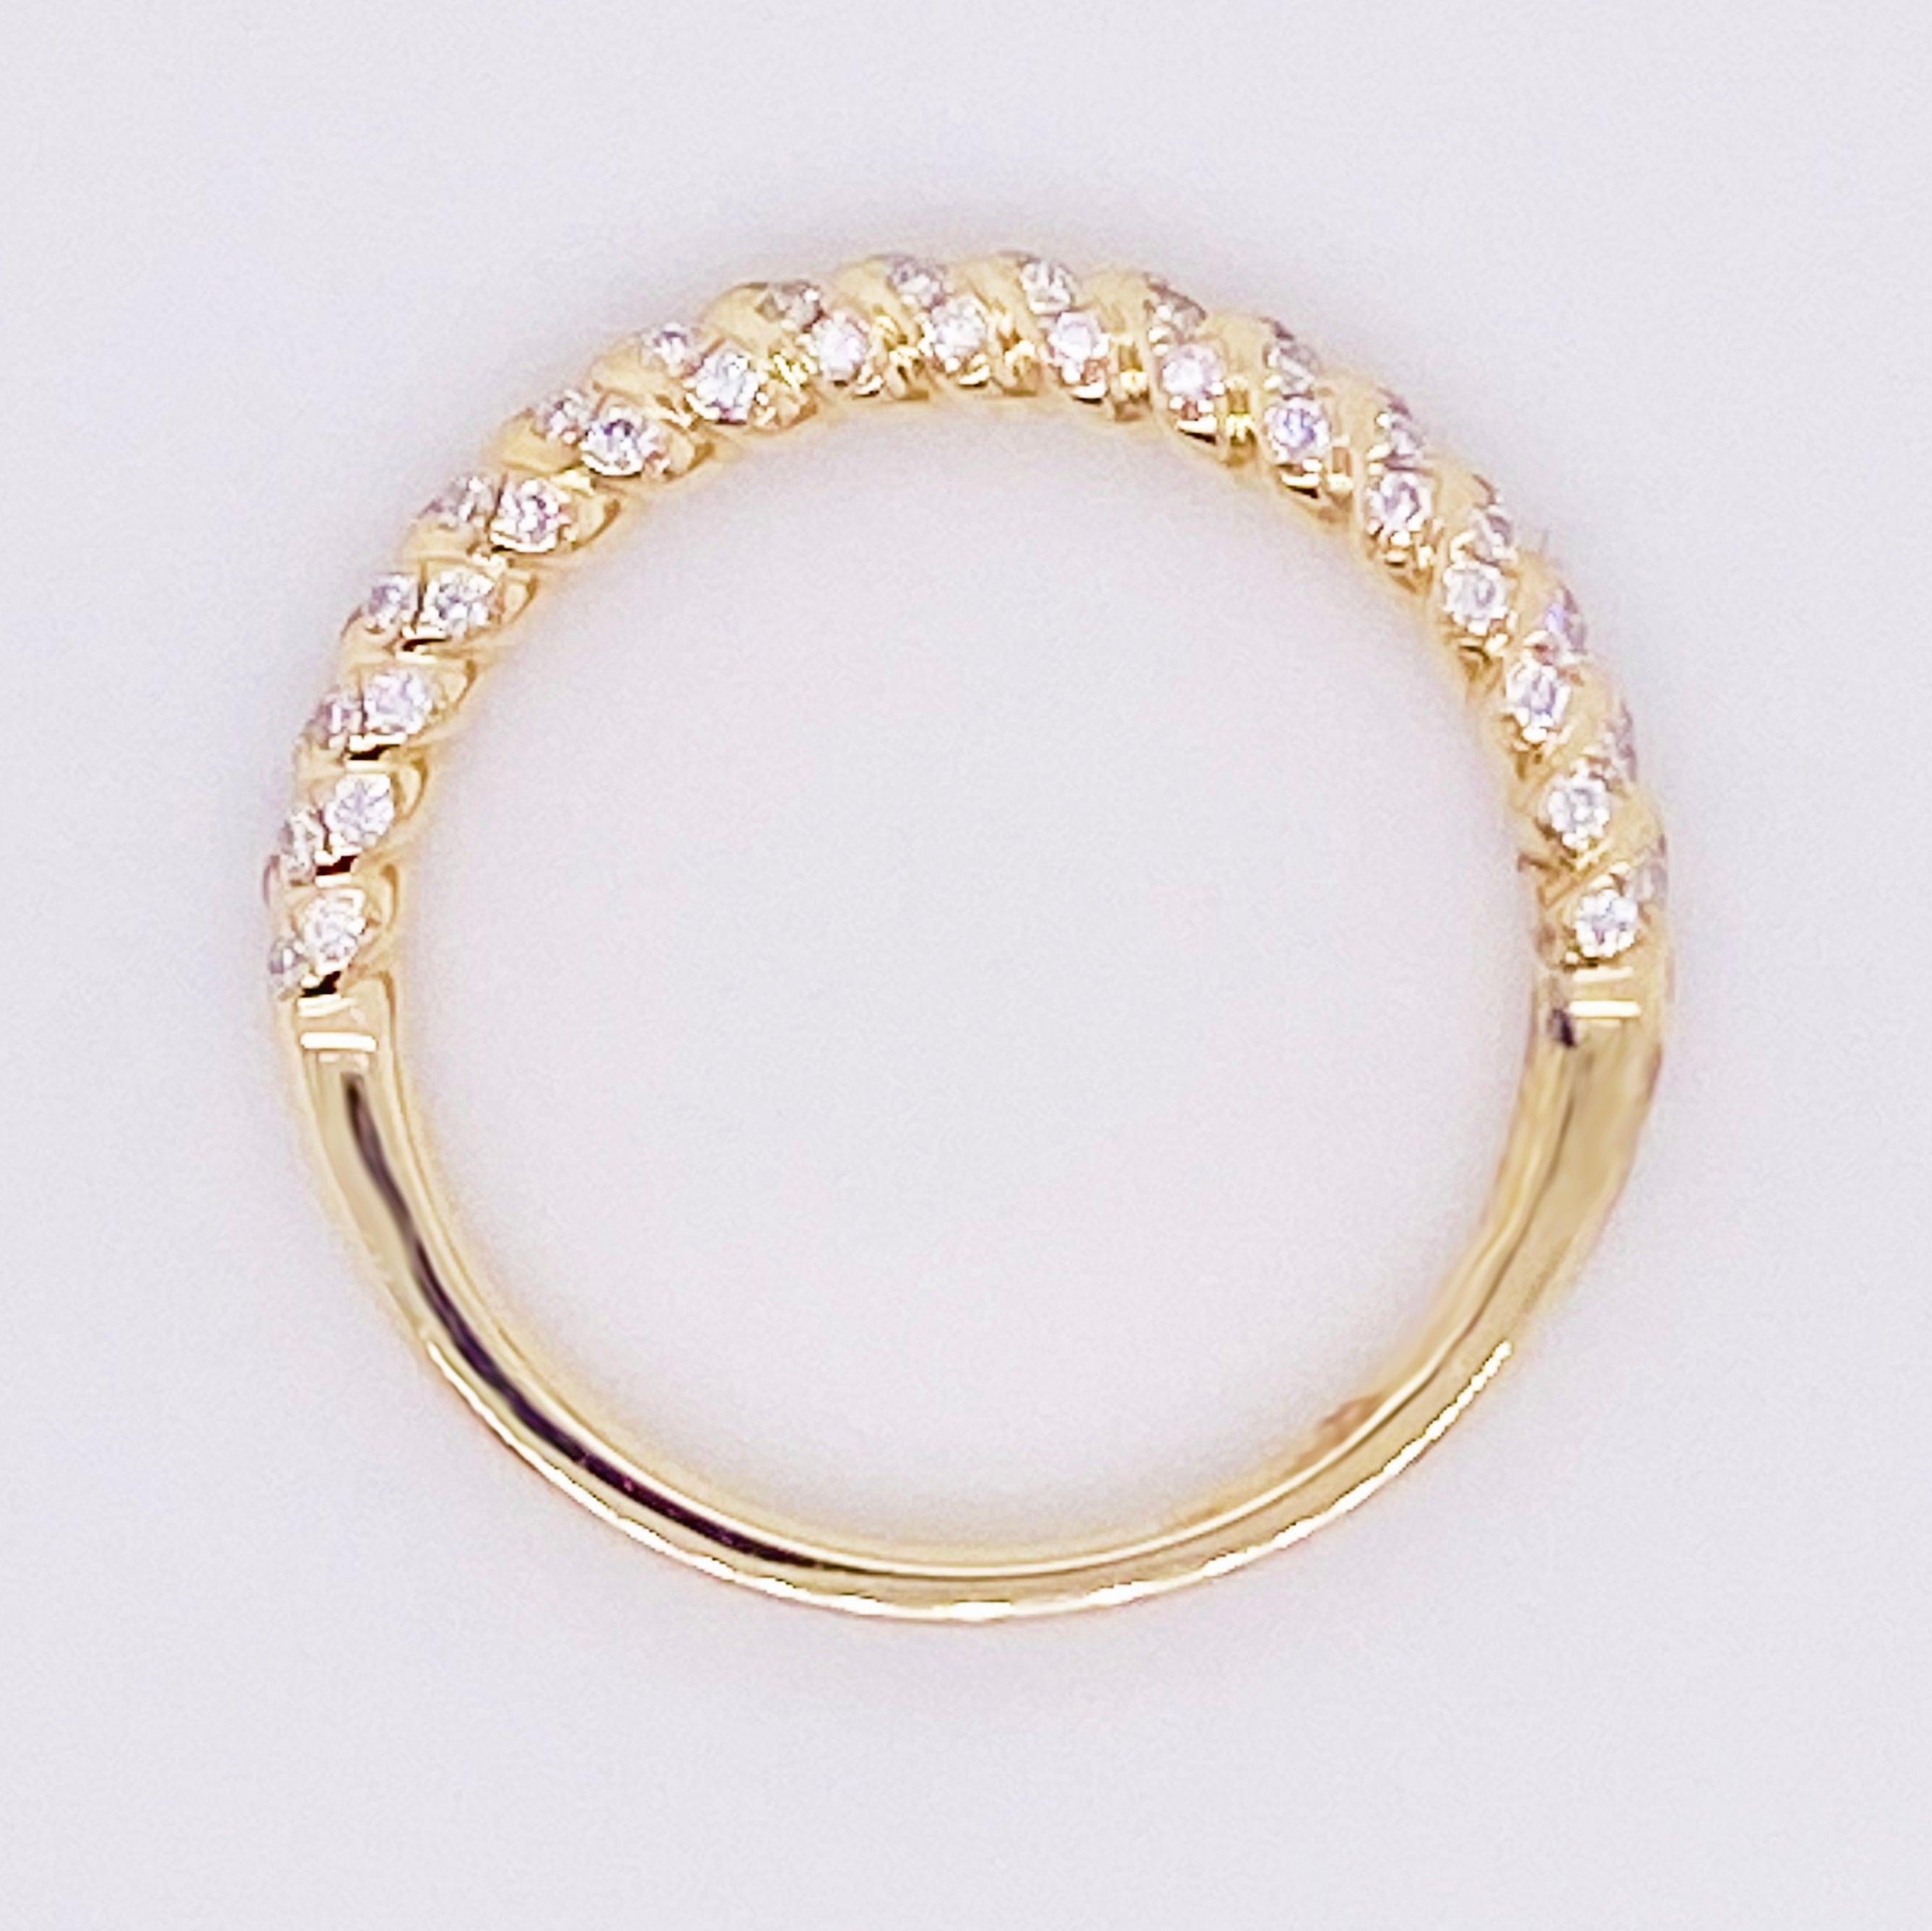 For Sale:  Twisted Diamond Band, 14 Karat Gold, Wedding Band, Twisted Ring, Stackable 4